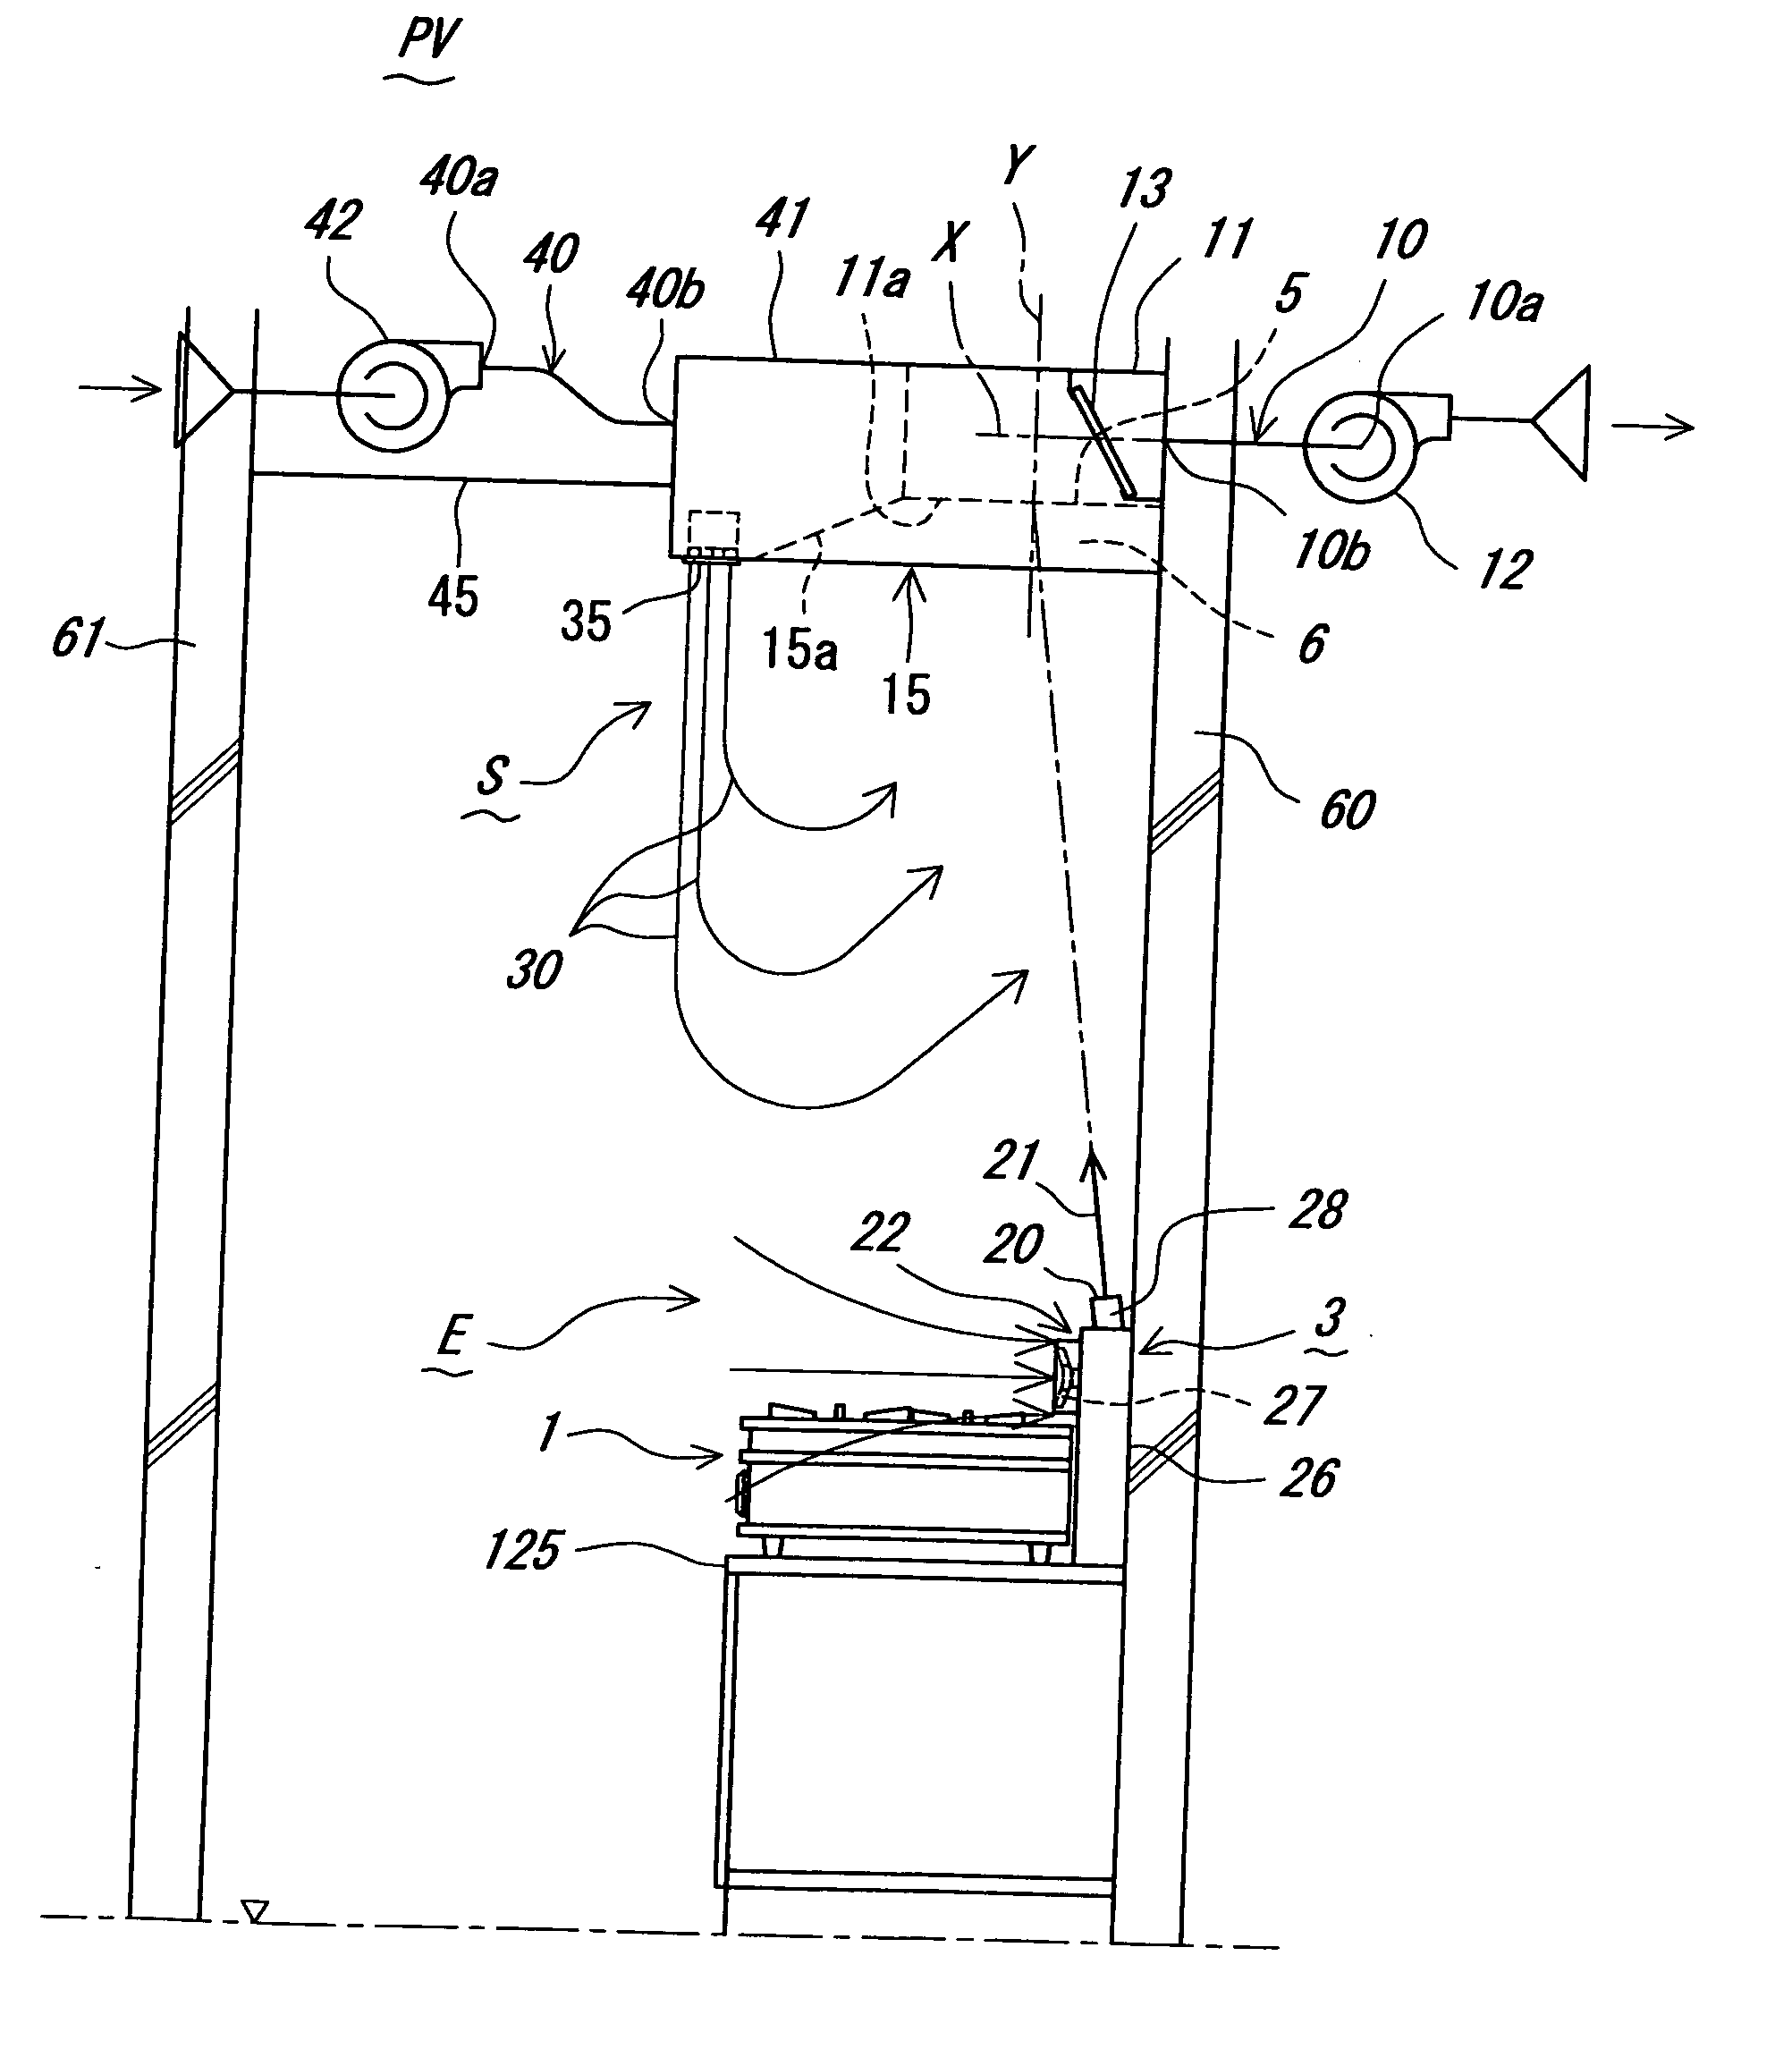 Method and device for local ventilation by buiding airflow and separating airflow